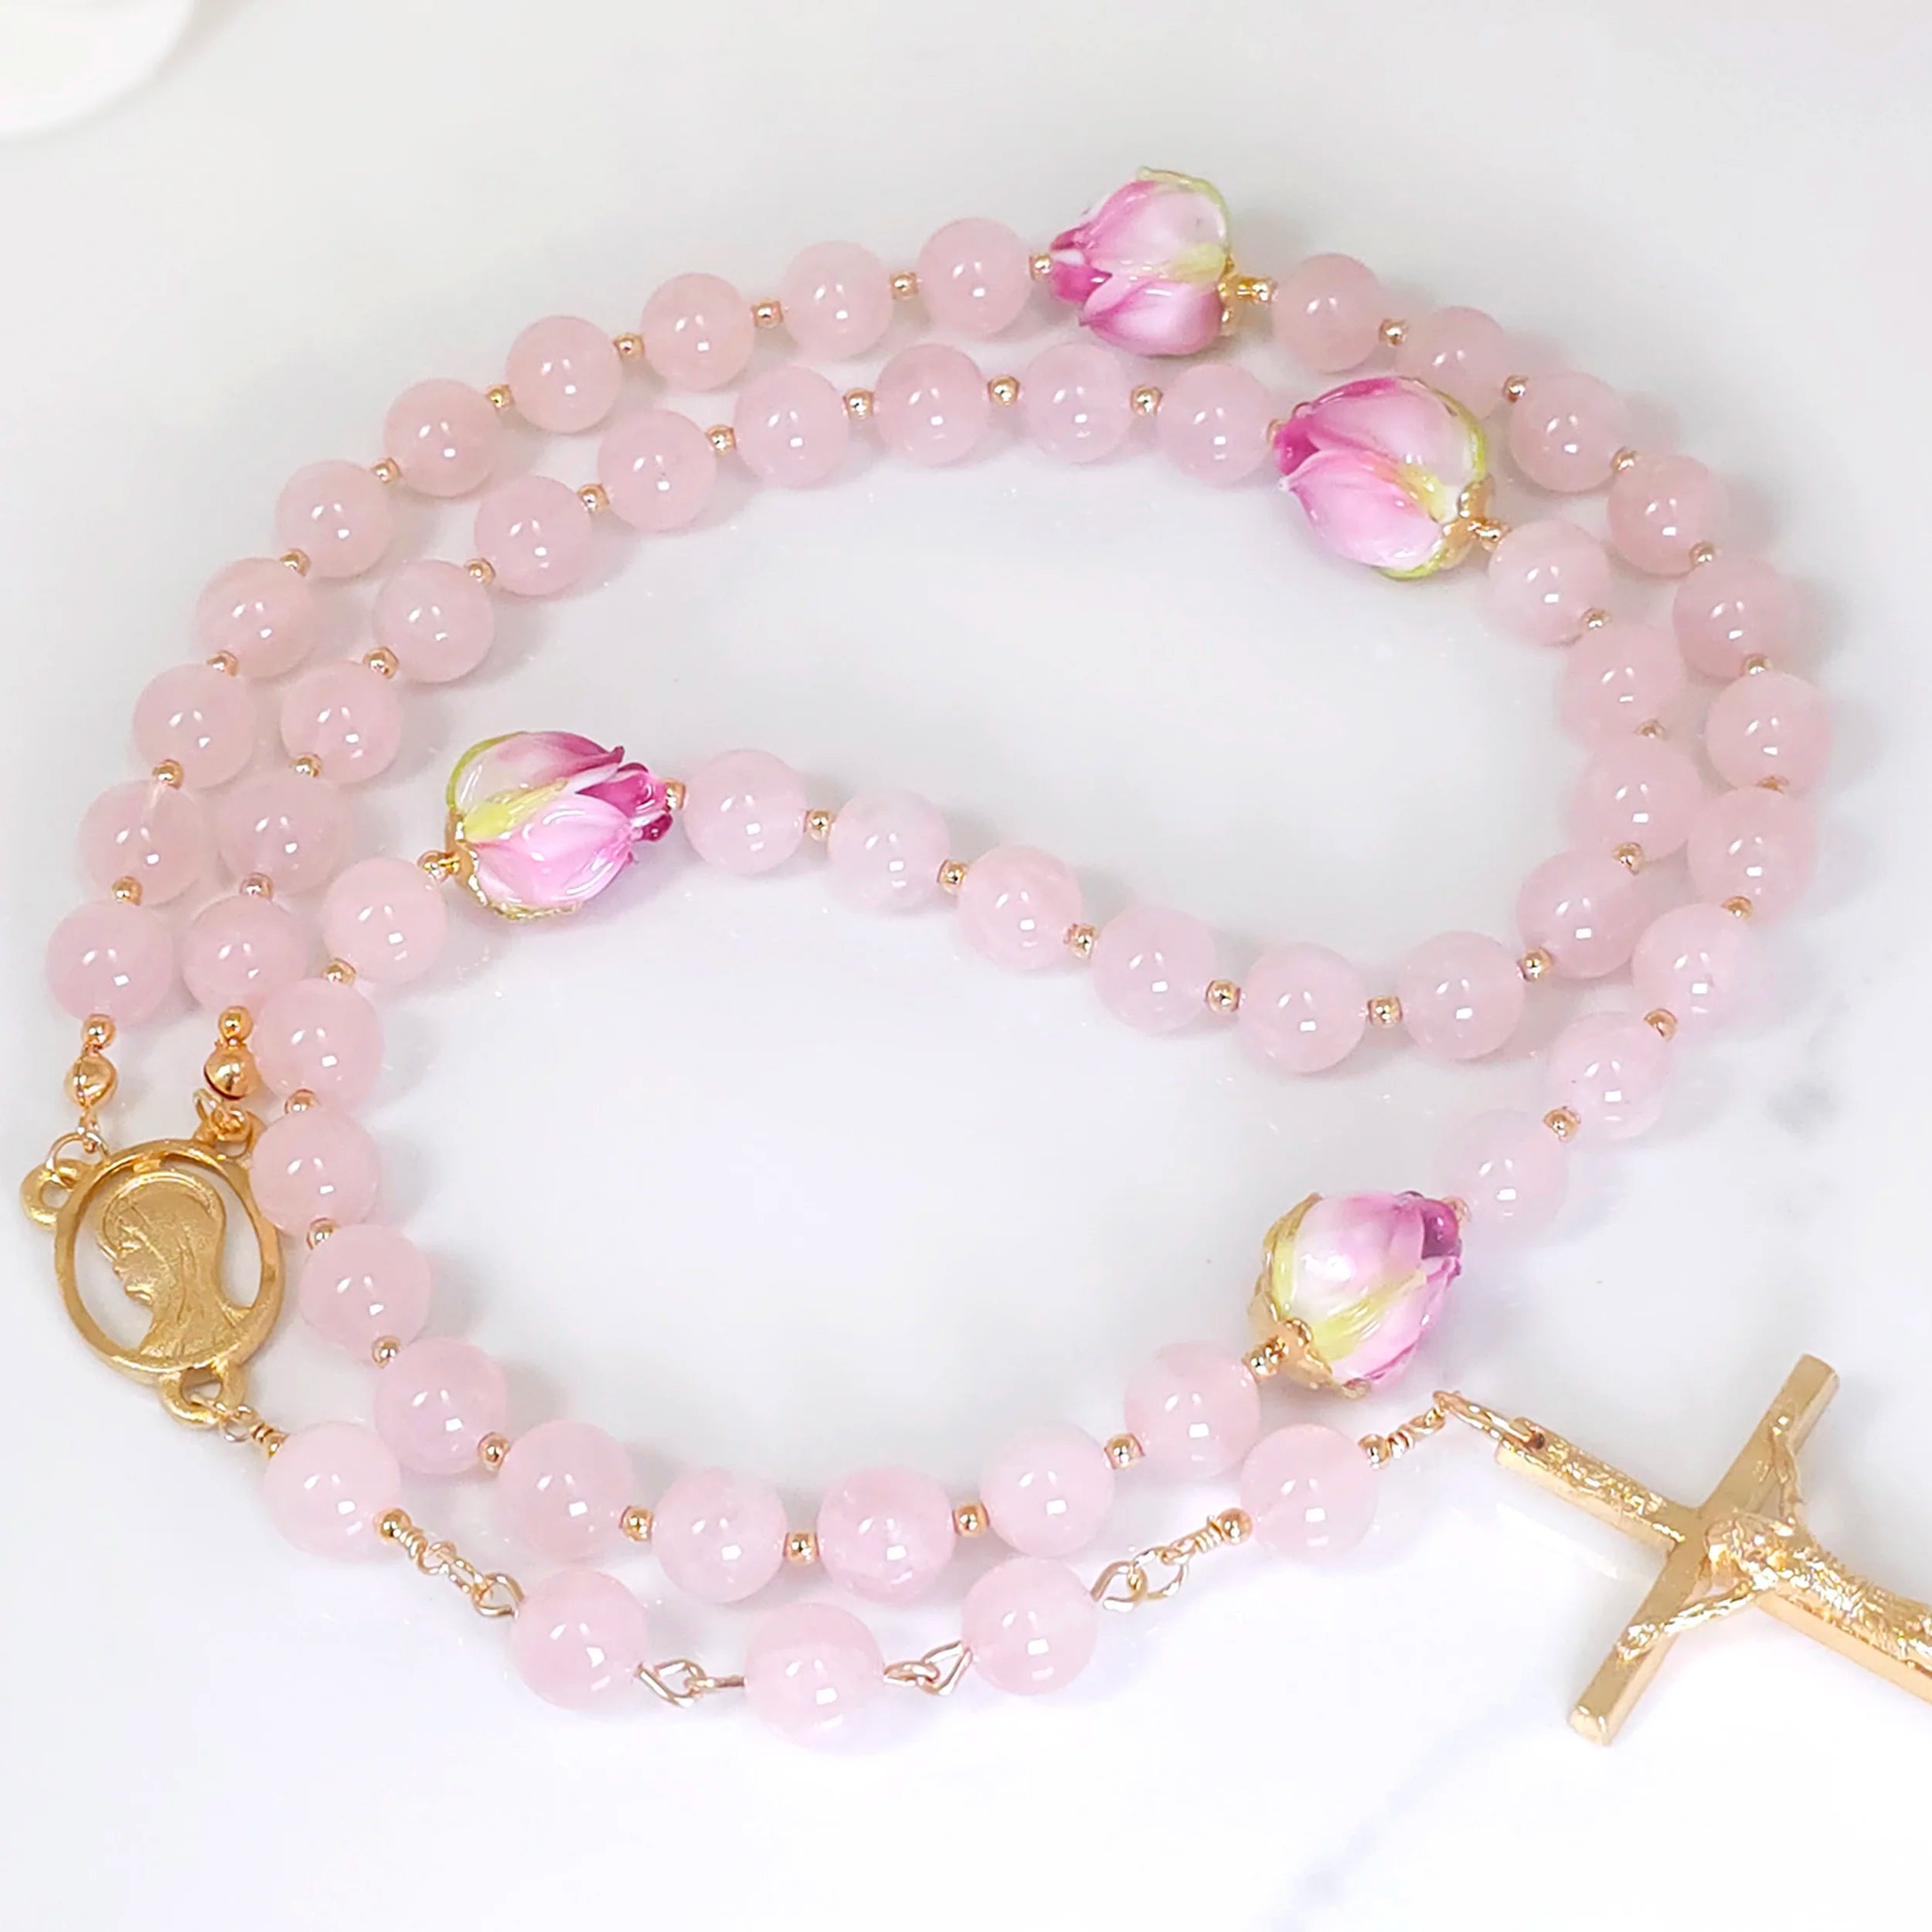 Close-up of Pink Rose Quartz rosary beads with gold-filled spacers, laid on a white table.